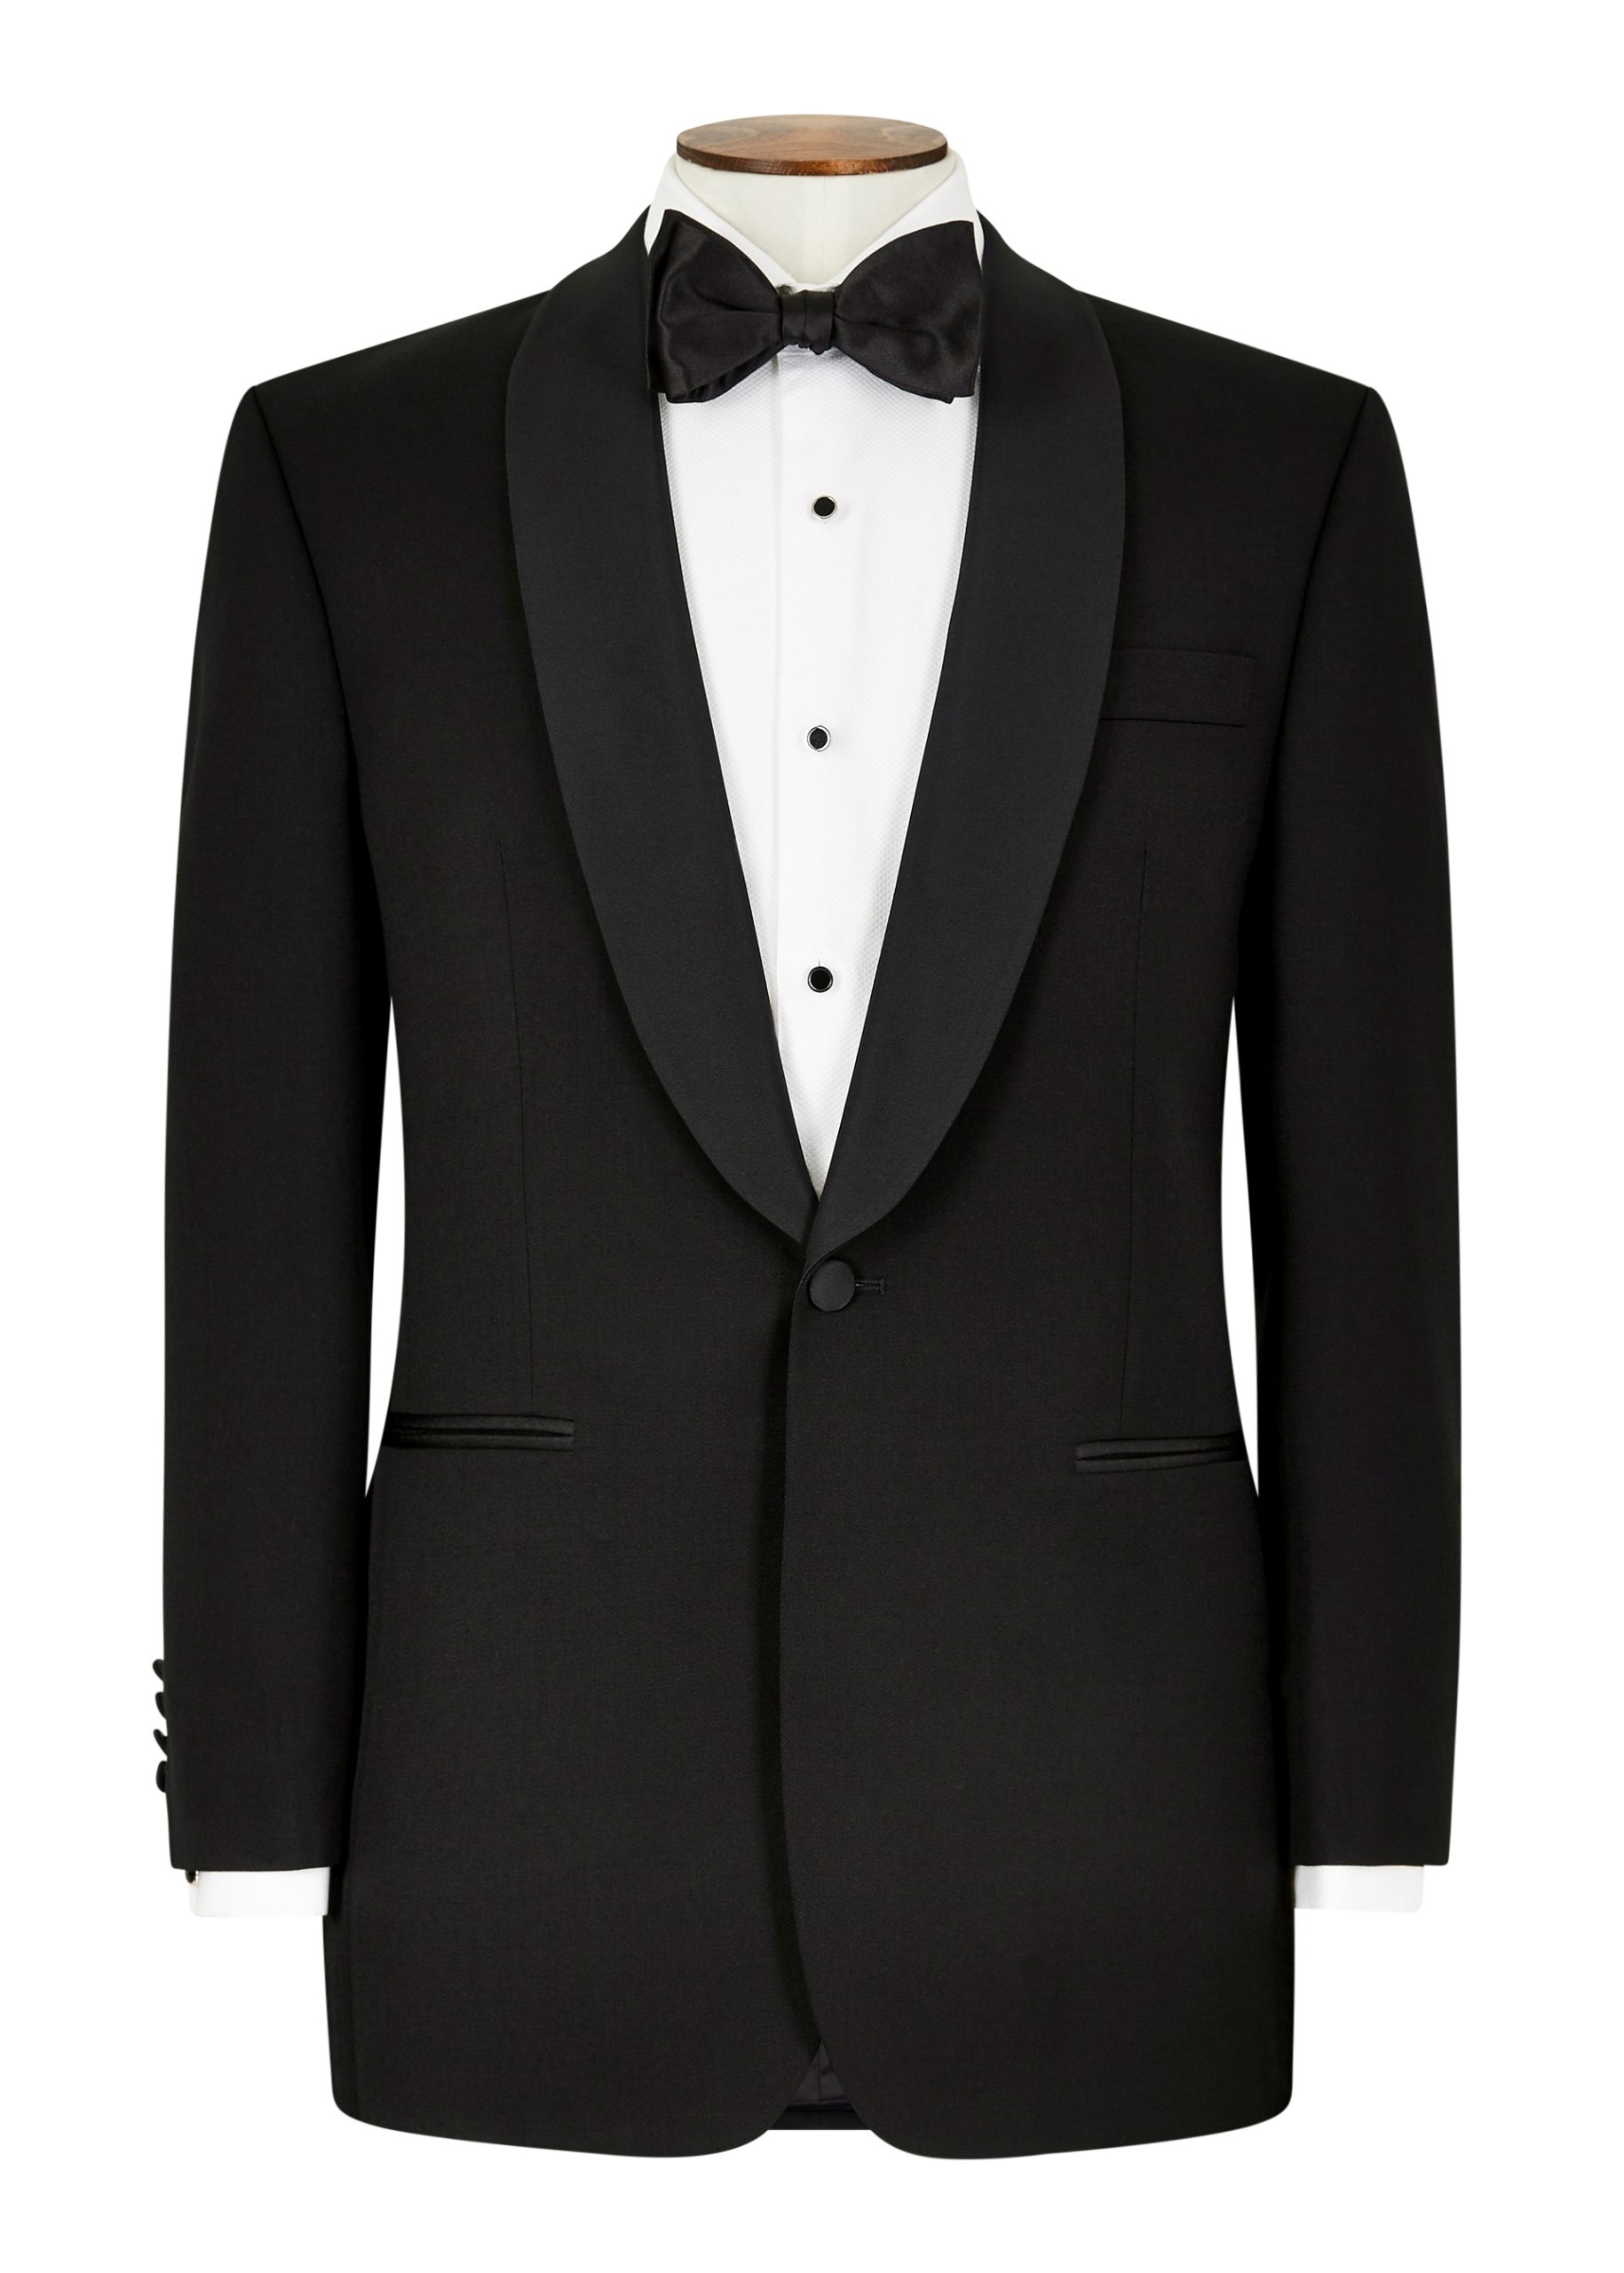 Roderick Charles shawl dinner suit for formal occasions